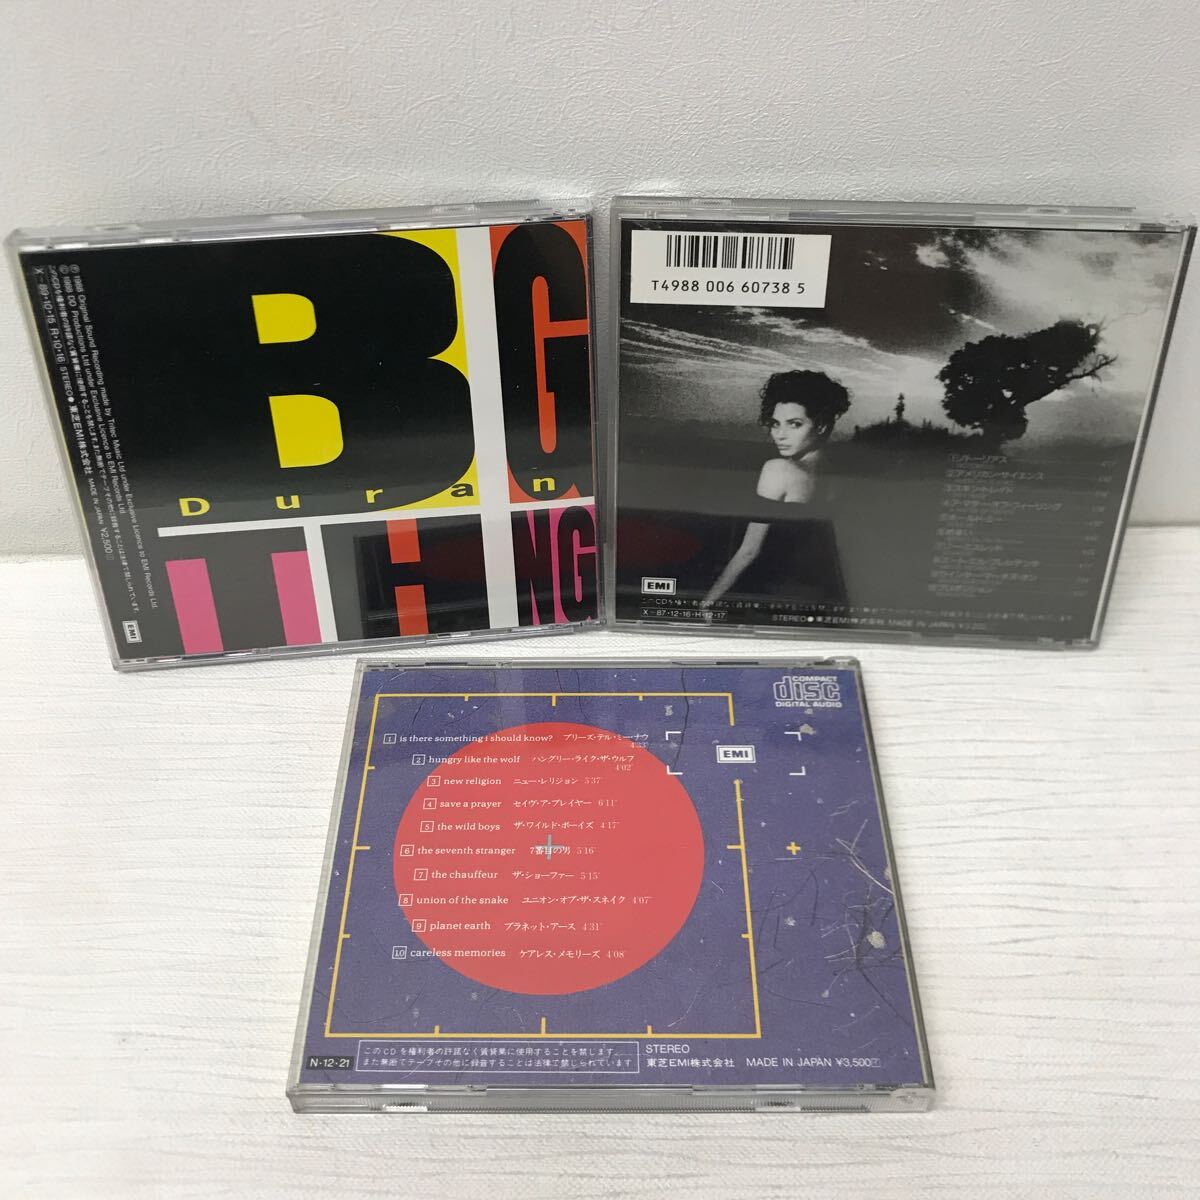 I0413A3 デュラン・デュラン DURAN DURAN CD 6巻セット 音楽 洋楽 / DECADE / SEVEN AND THE RAGGED TIGER / ARENA / BIG THING 他の画像7